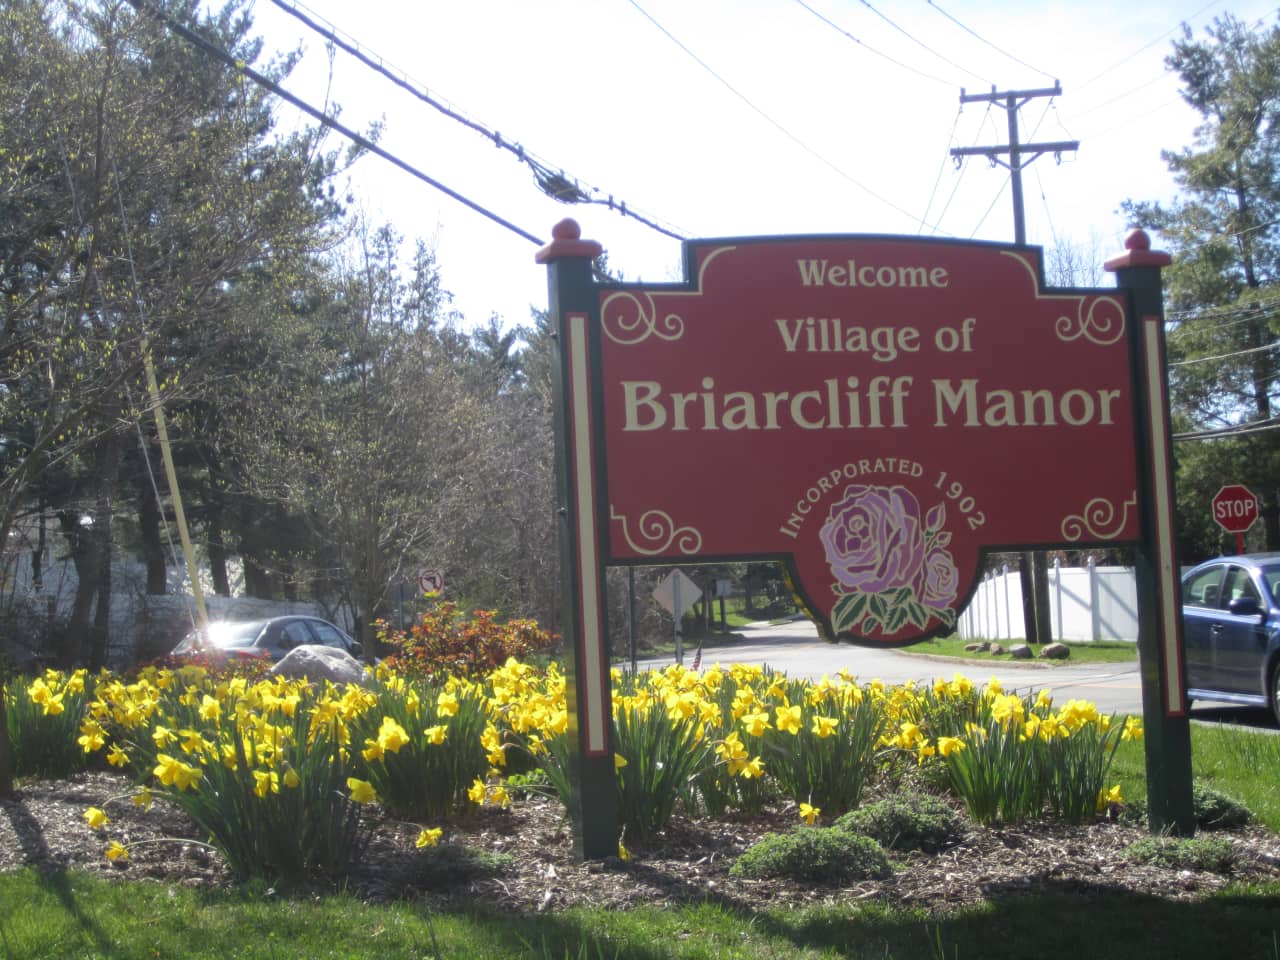 Construction on Pleasantville Road is set to continue this week, according to Briarcliff Manor village officials.